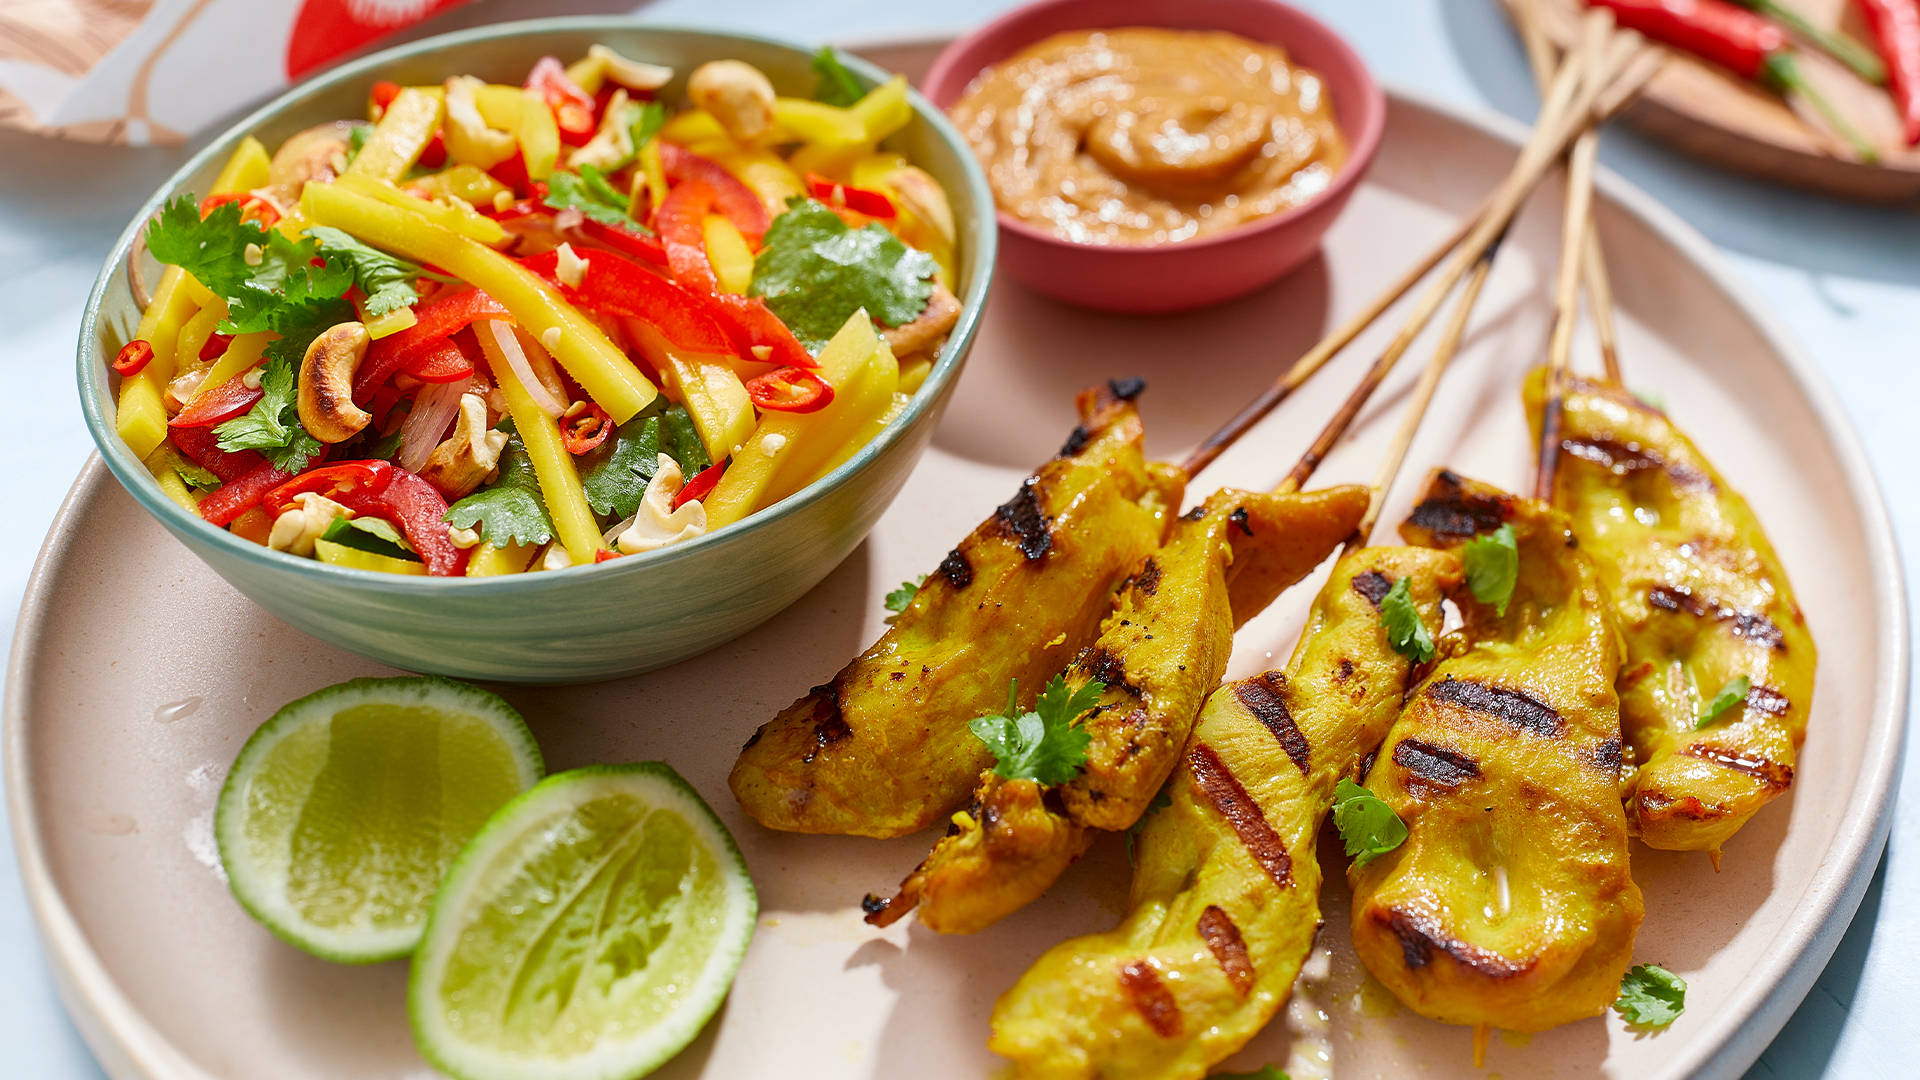 Mouthwatering Chicken Satay with Creamy Cashew Sauce Wallpaper